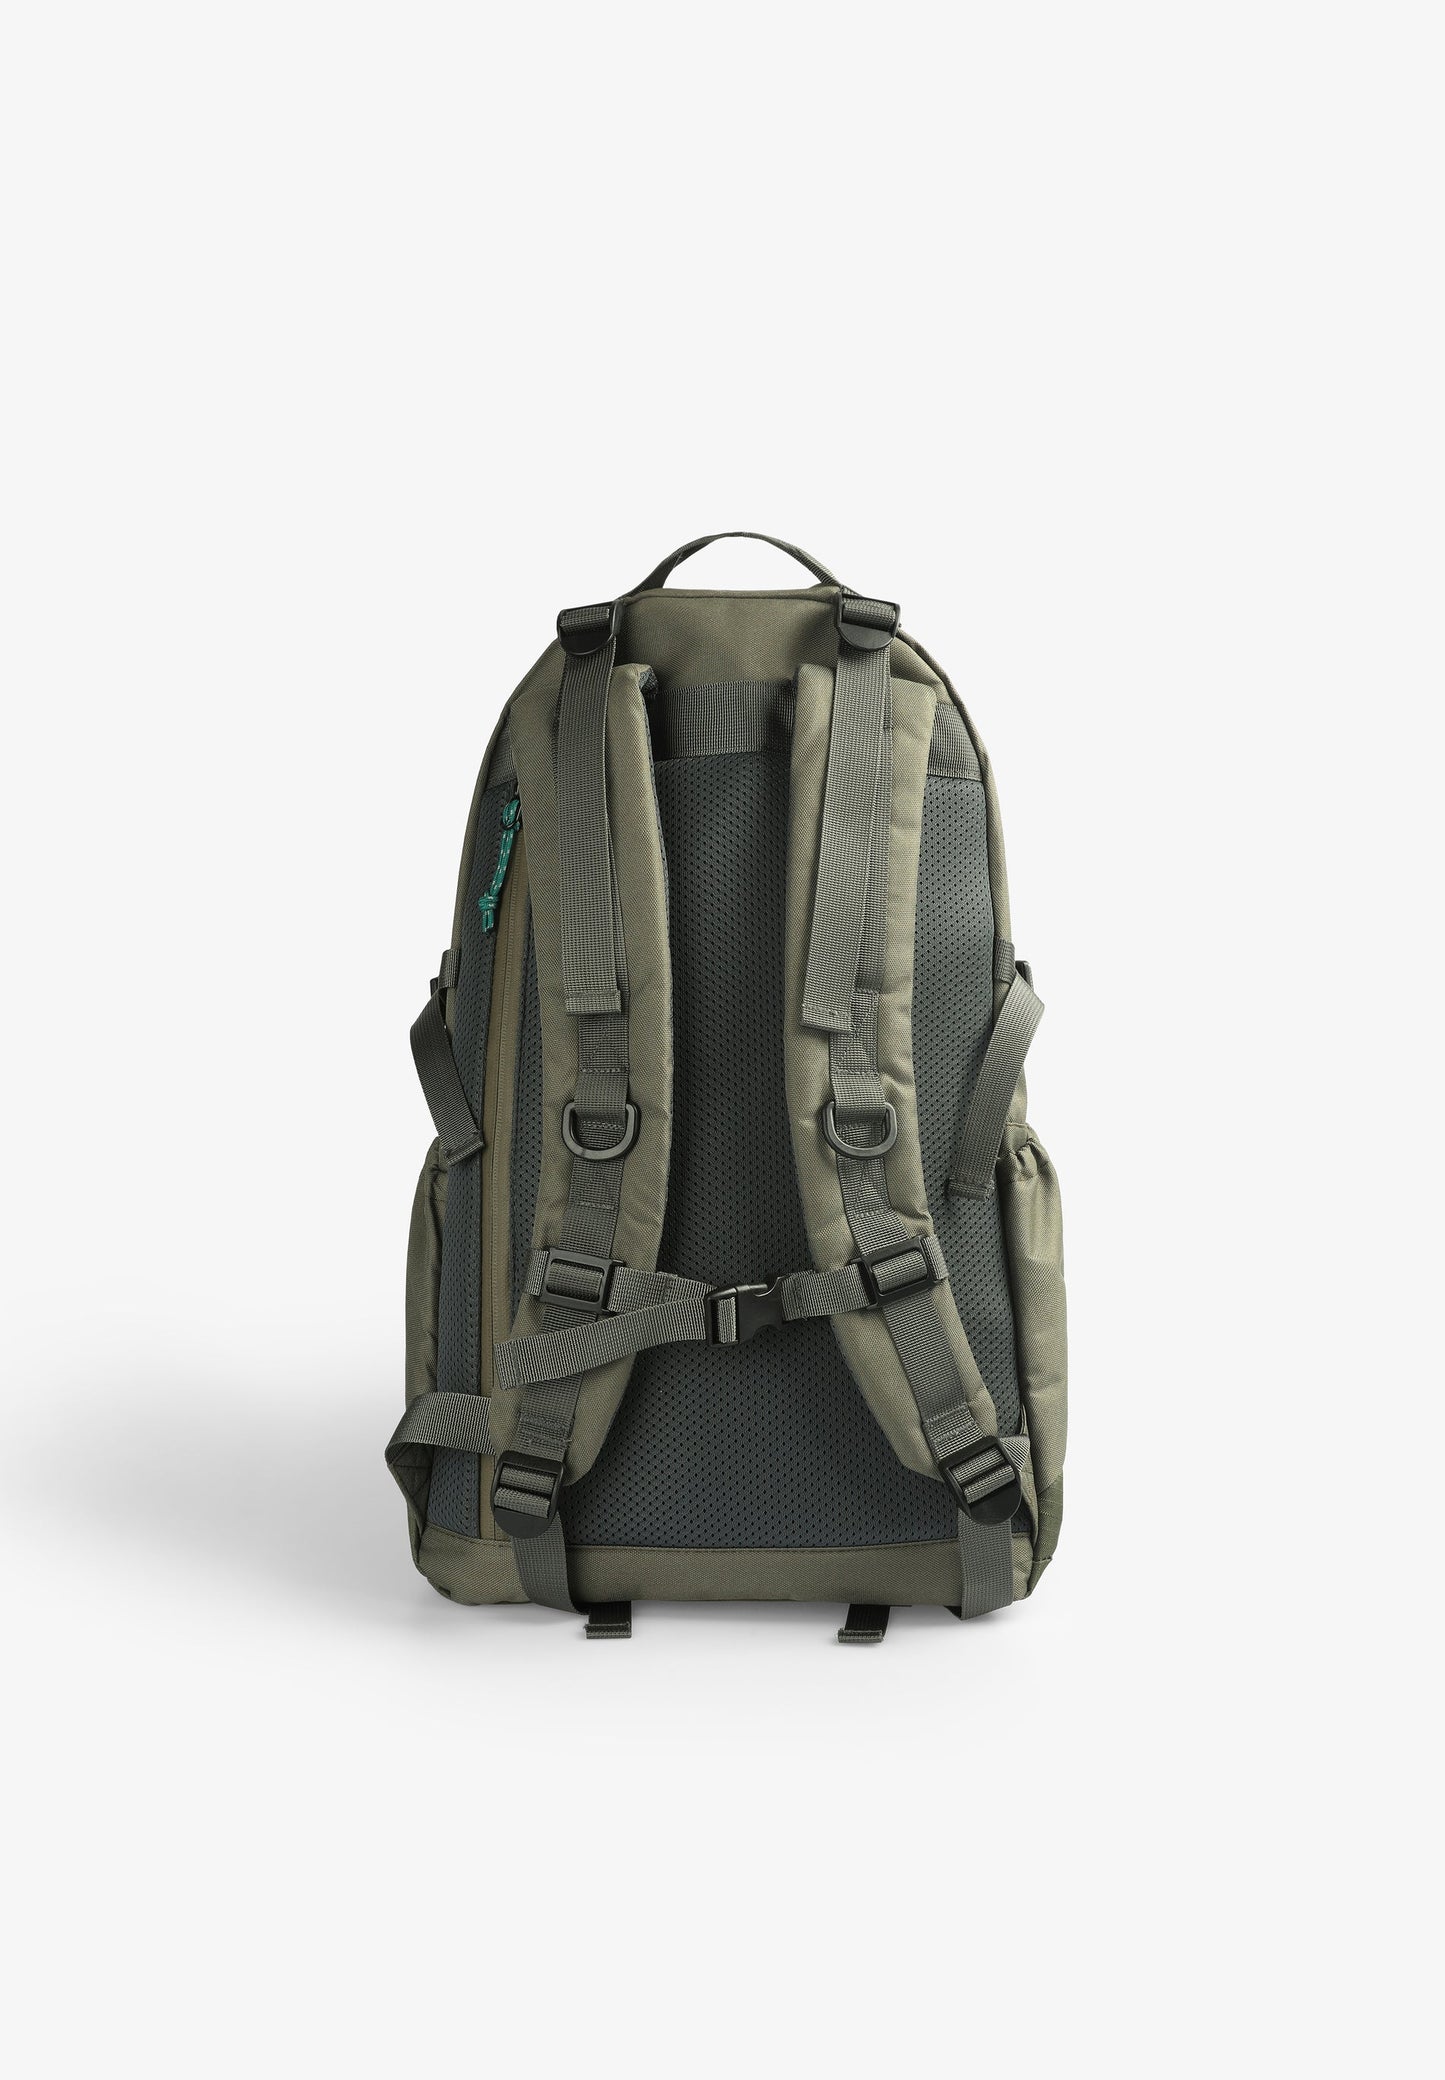 PROJECT BACKPACK